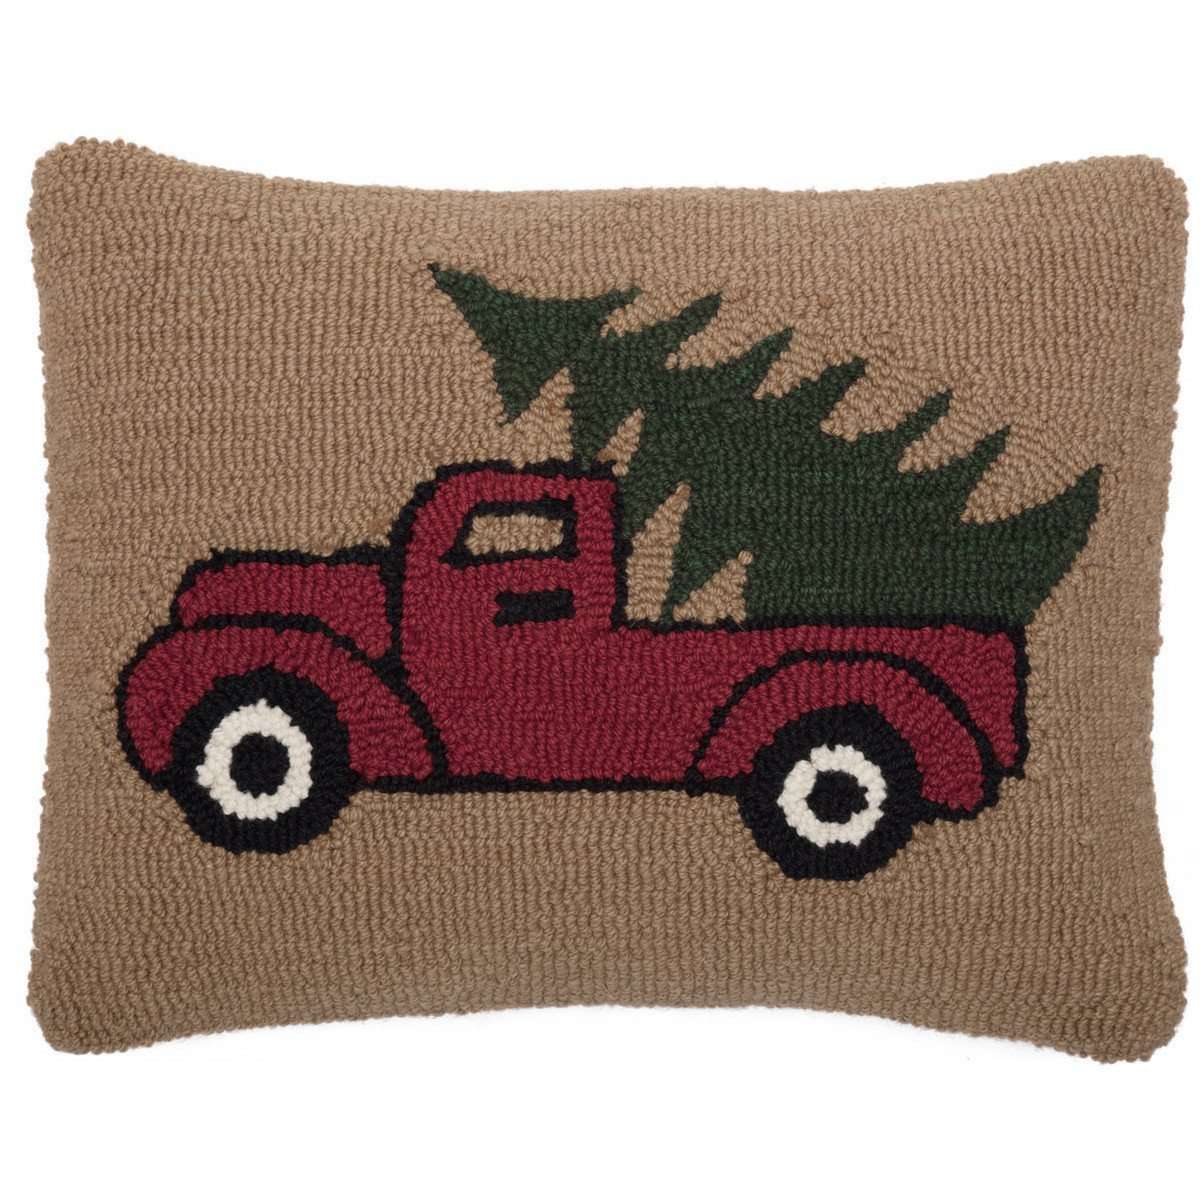 Hooked Truck Pillow, 14"x18" General VHC Brands 